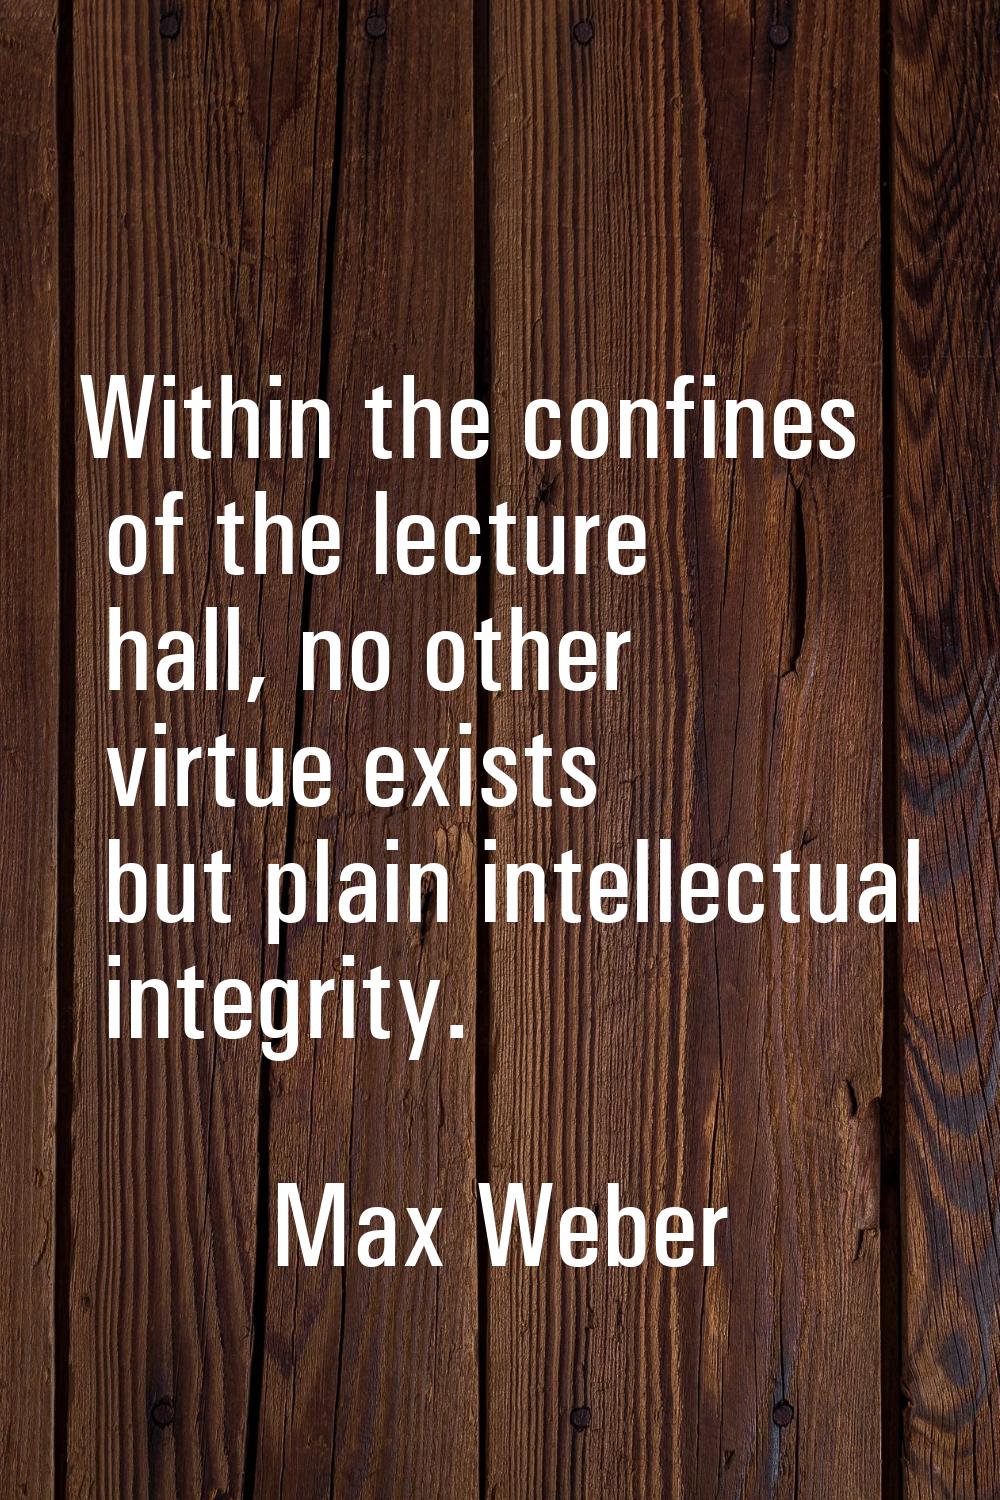 Within the confines of the lecture hall, no other virtue exists but plain intellectual integrity.